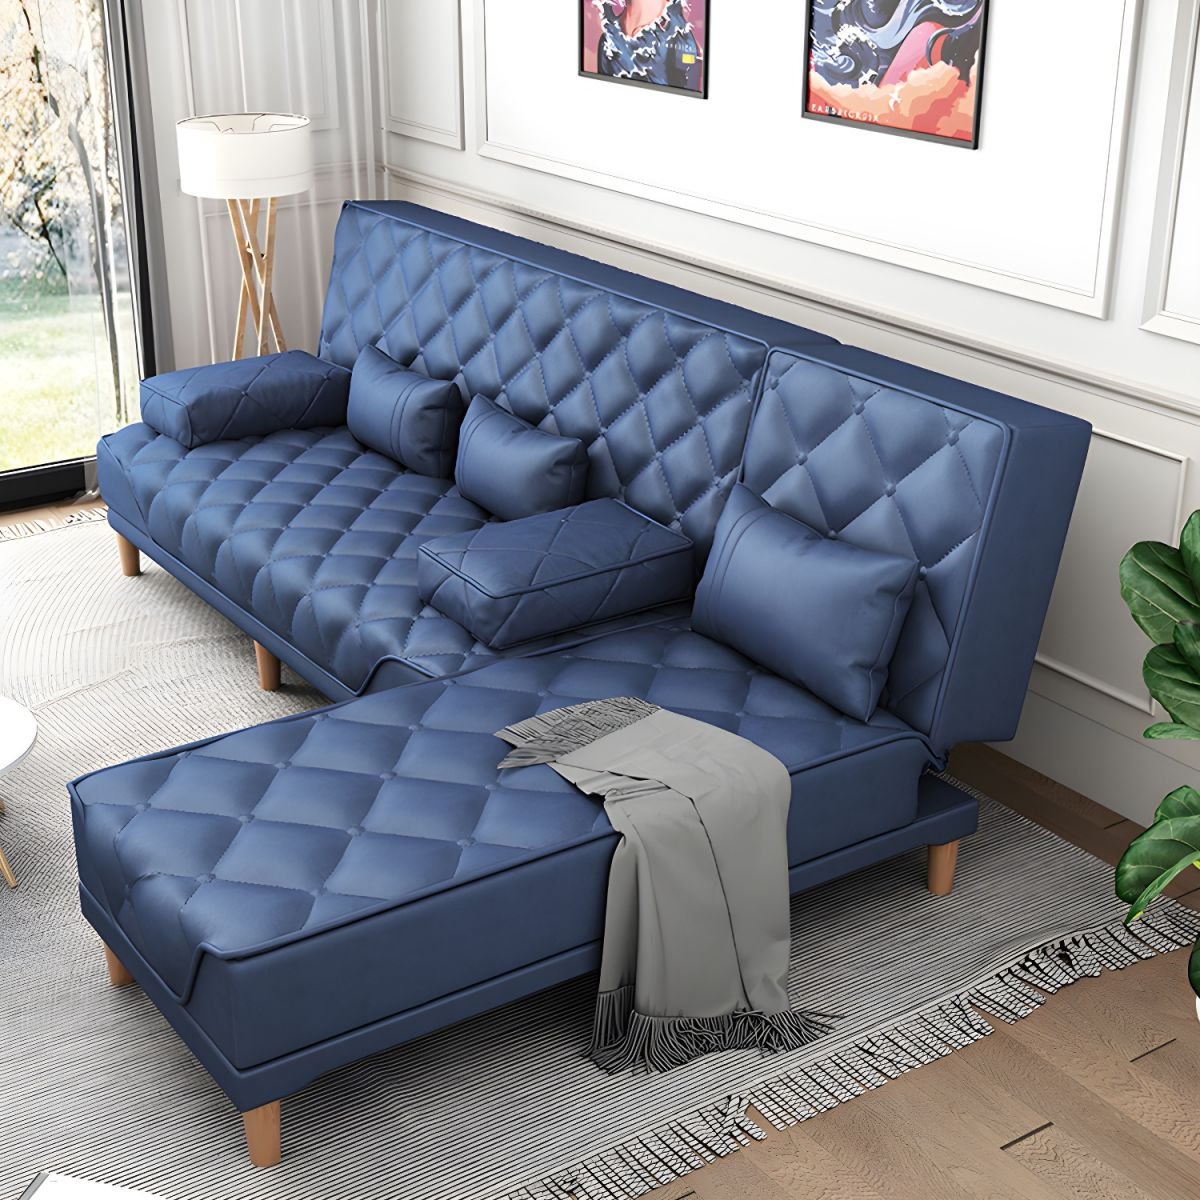 Contemporary Tight Back Convertible Sofa and Chaise with Pillow Top Arm - 96"L x 57"W x 34"H Dark Blue Tech Cloth